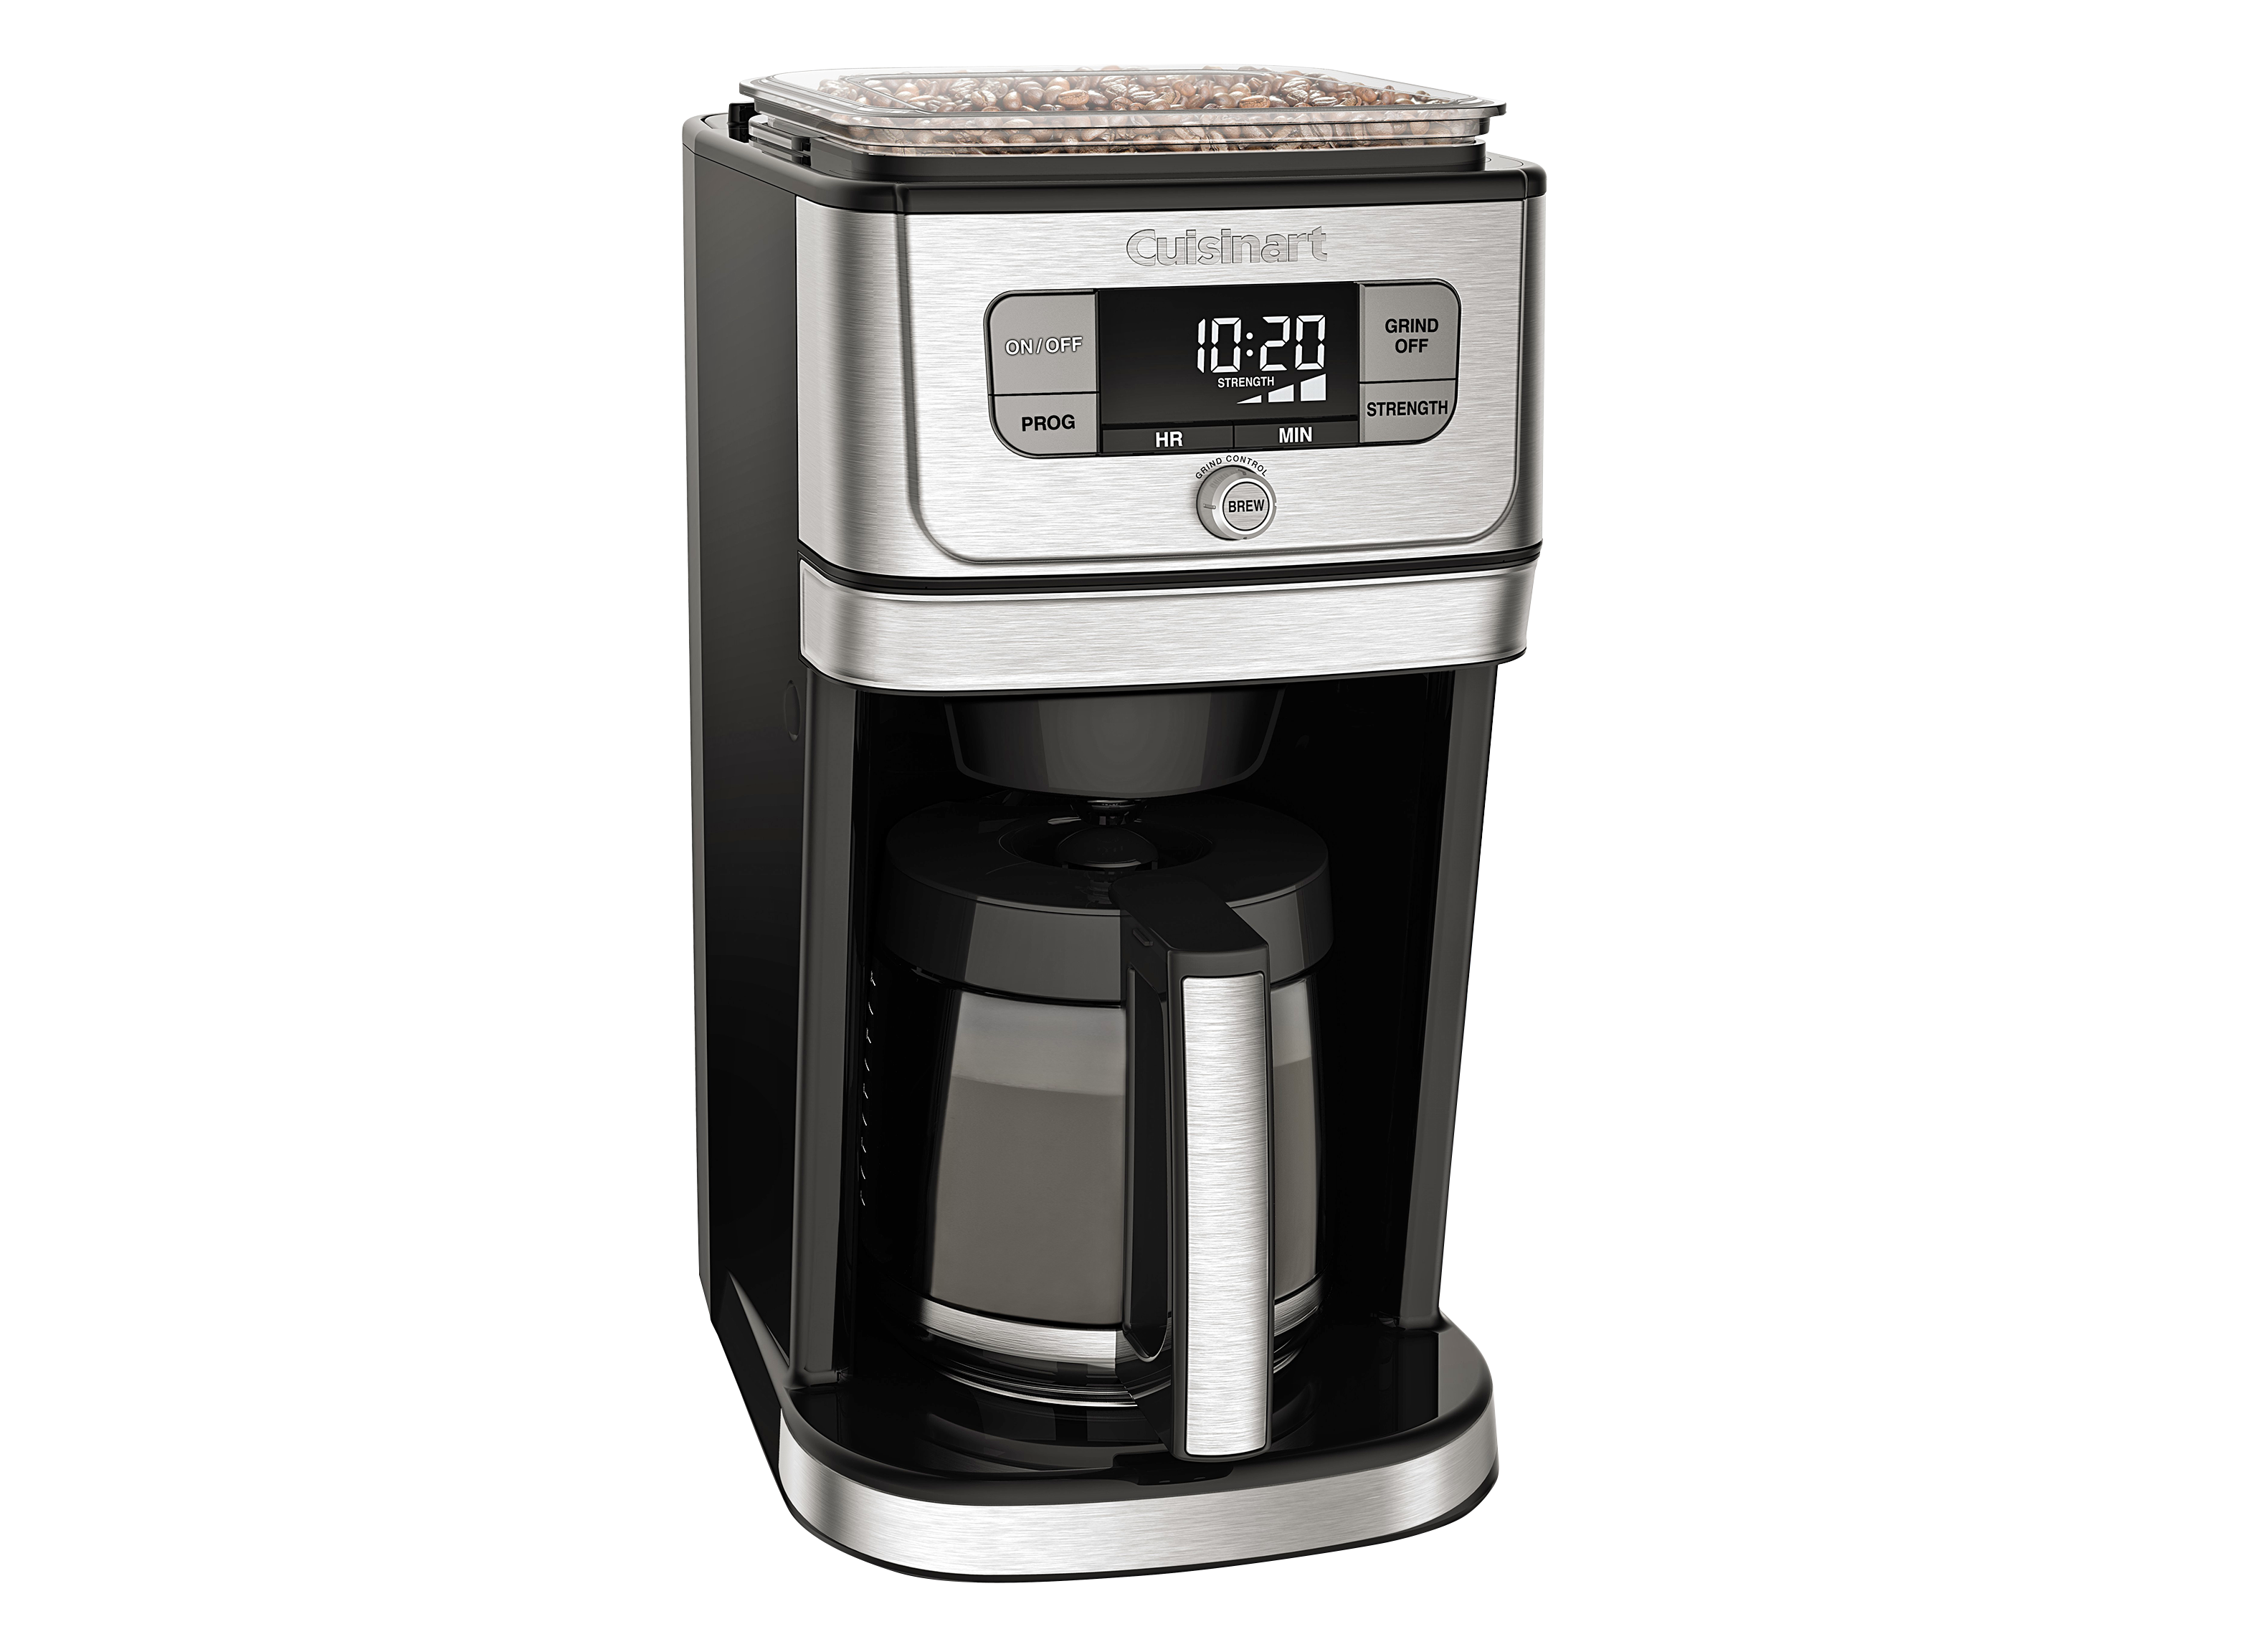 Cuisinart 12-Cup Automatic Grind and Brew Coffee Maker in Black